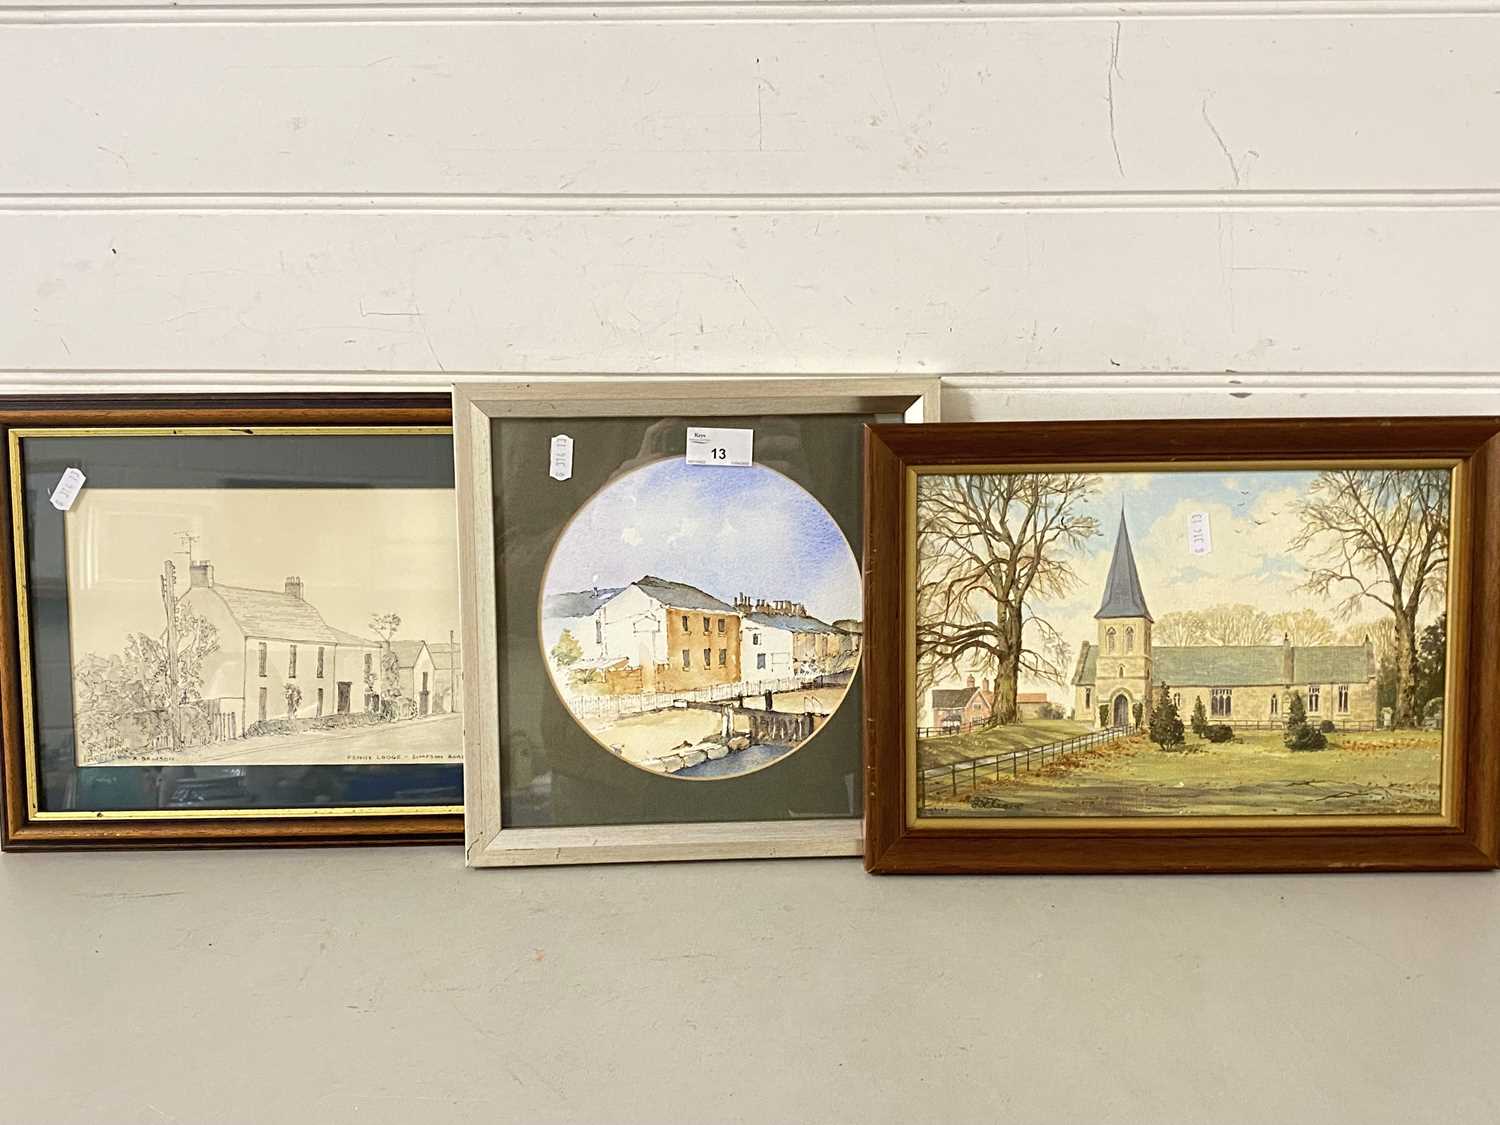 Mixed Lot: Study of Fenny Lodge - Simpson Road together with Derek Crane study of Sand Hutton